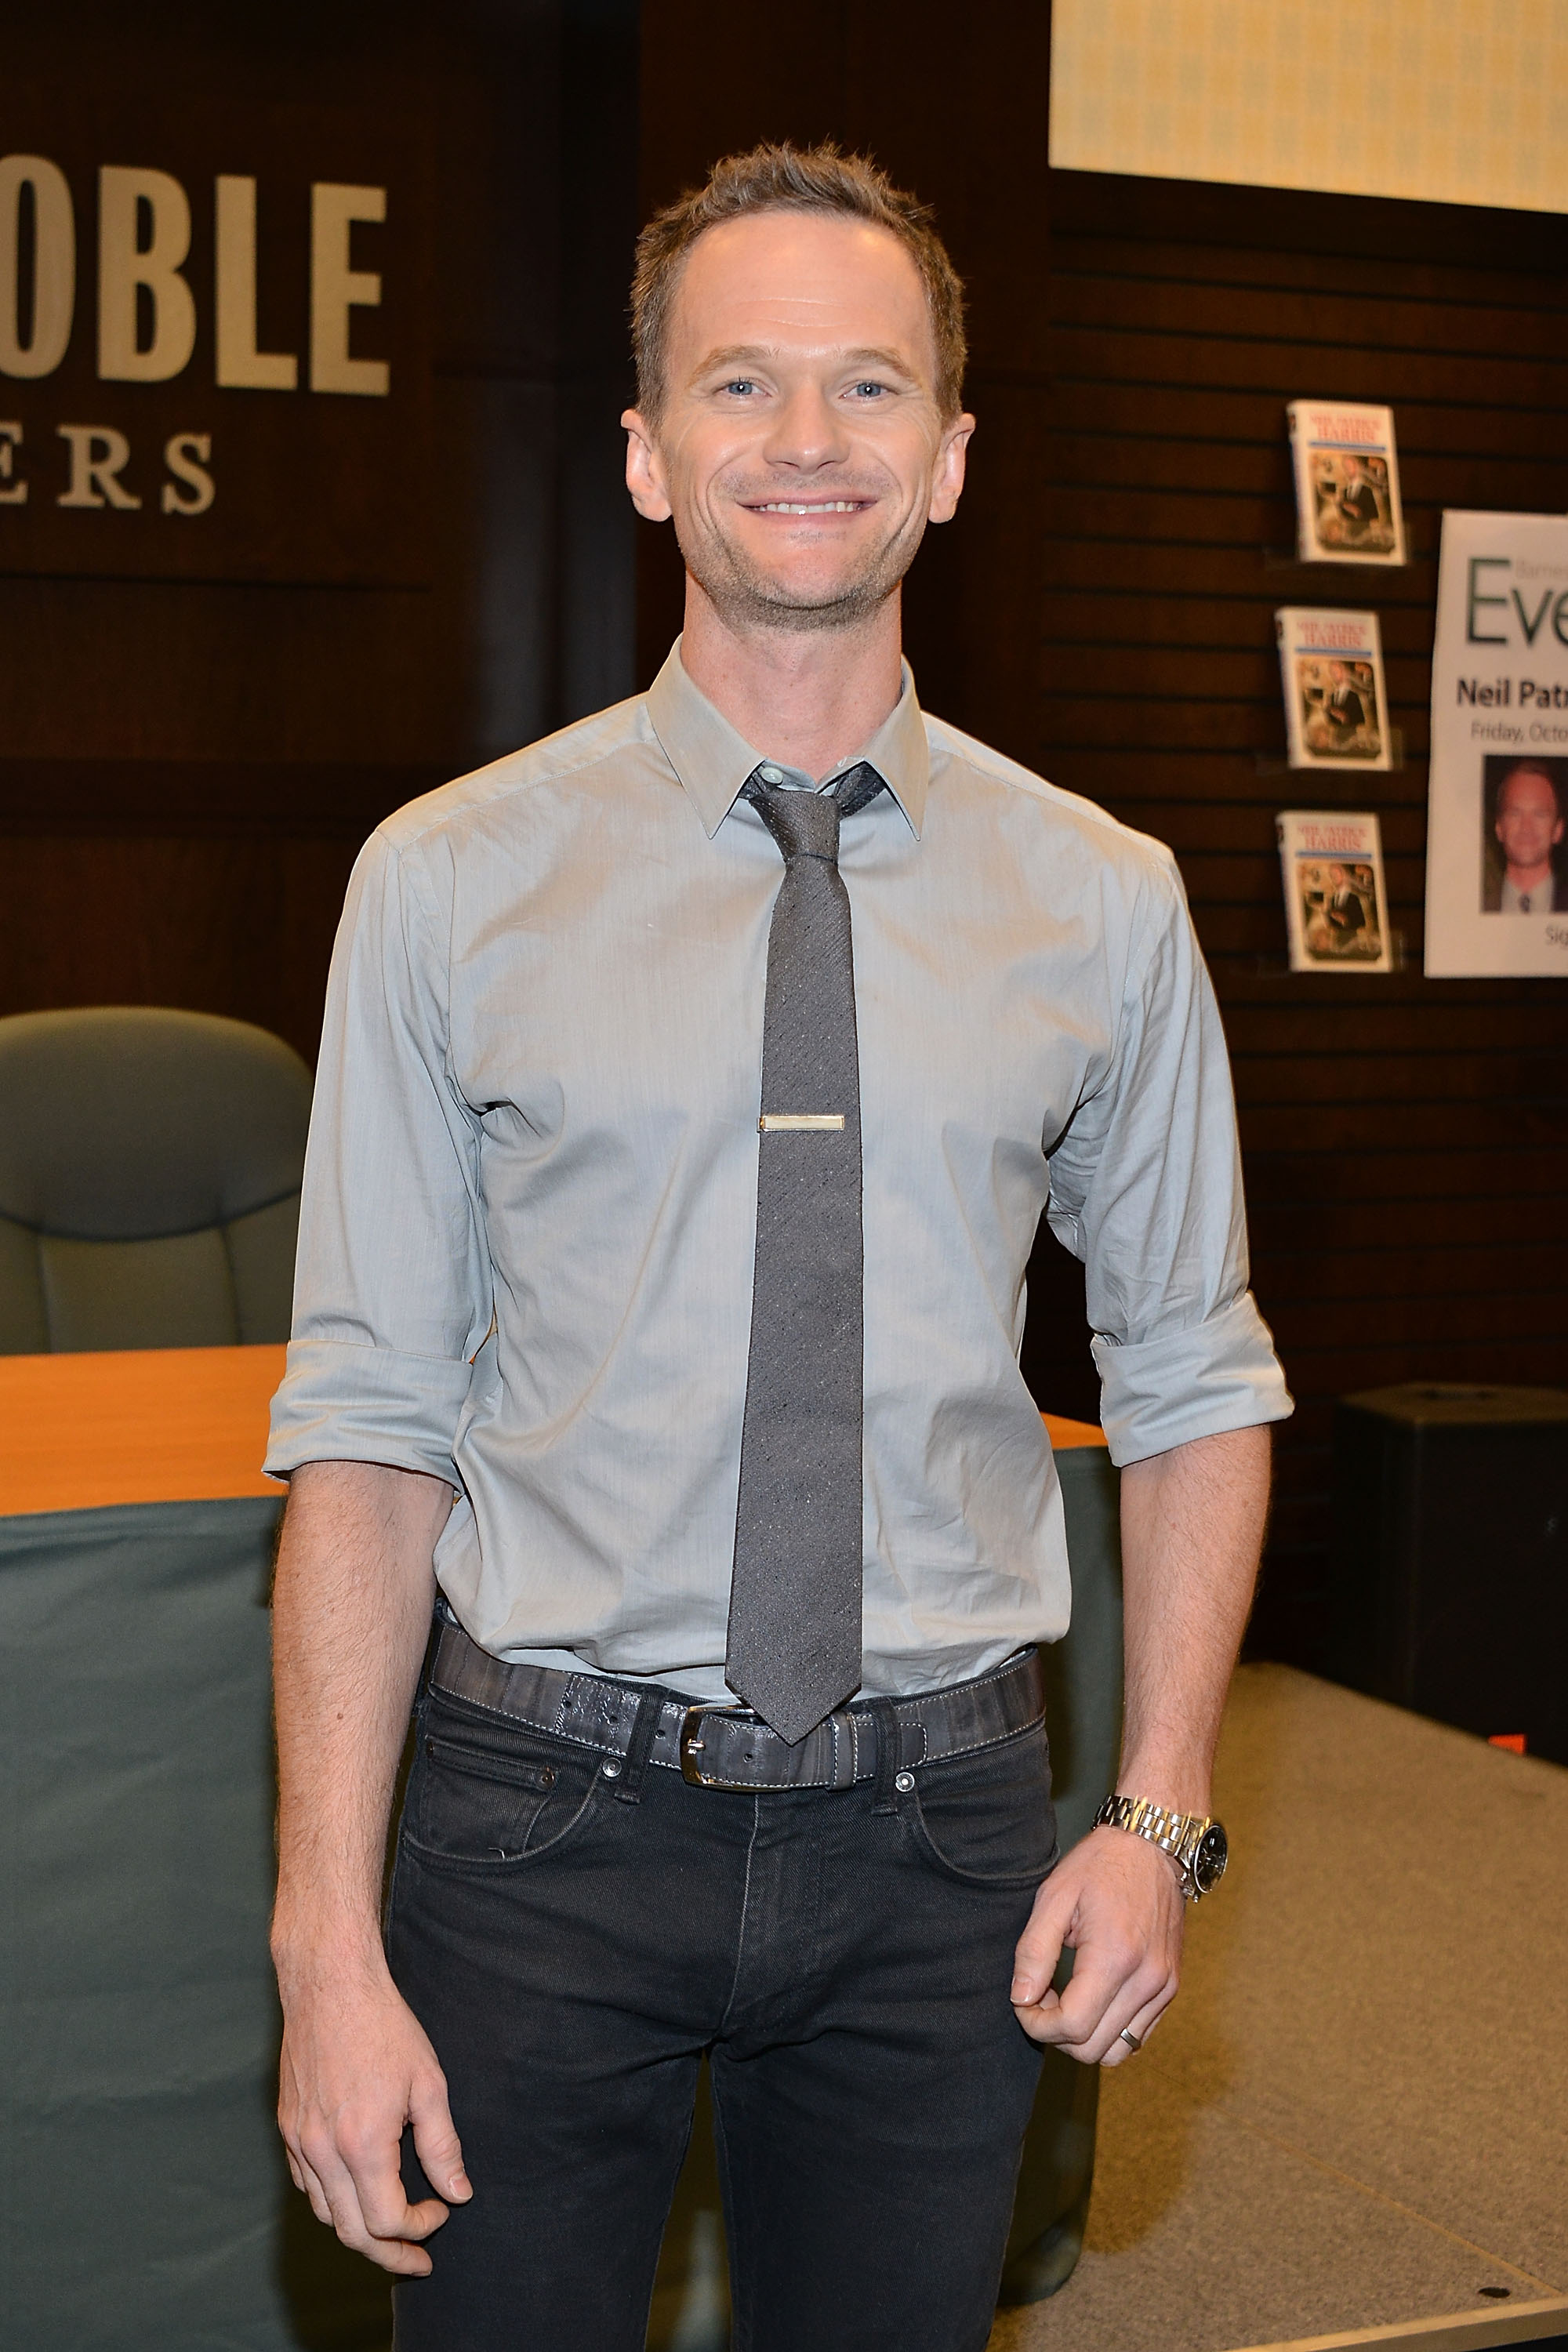 Neil Patrick Harris signs copies of his new book "Neil Patrick Harris: Choose Your Own Autobiography" at Barnes & Noble bookstore at Barnes & Noble bookstore at The Grove on October 24v in Los Angeles, California.